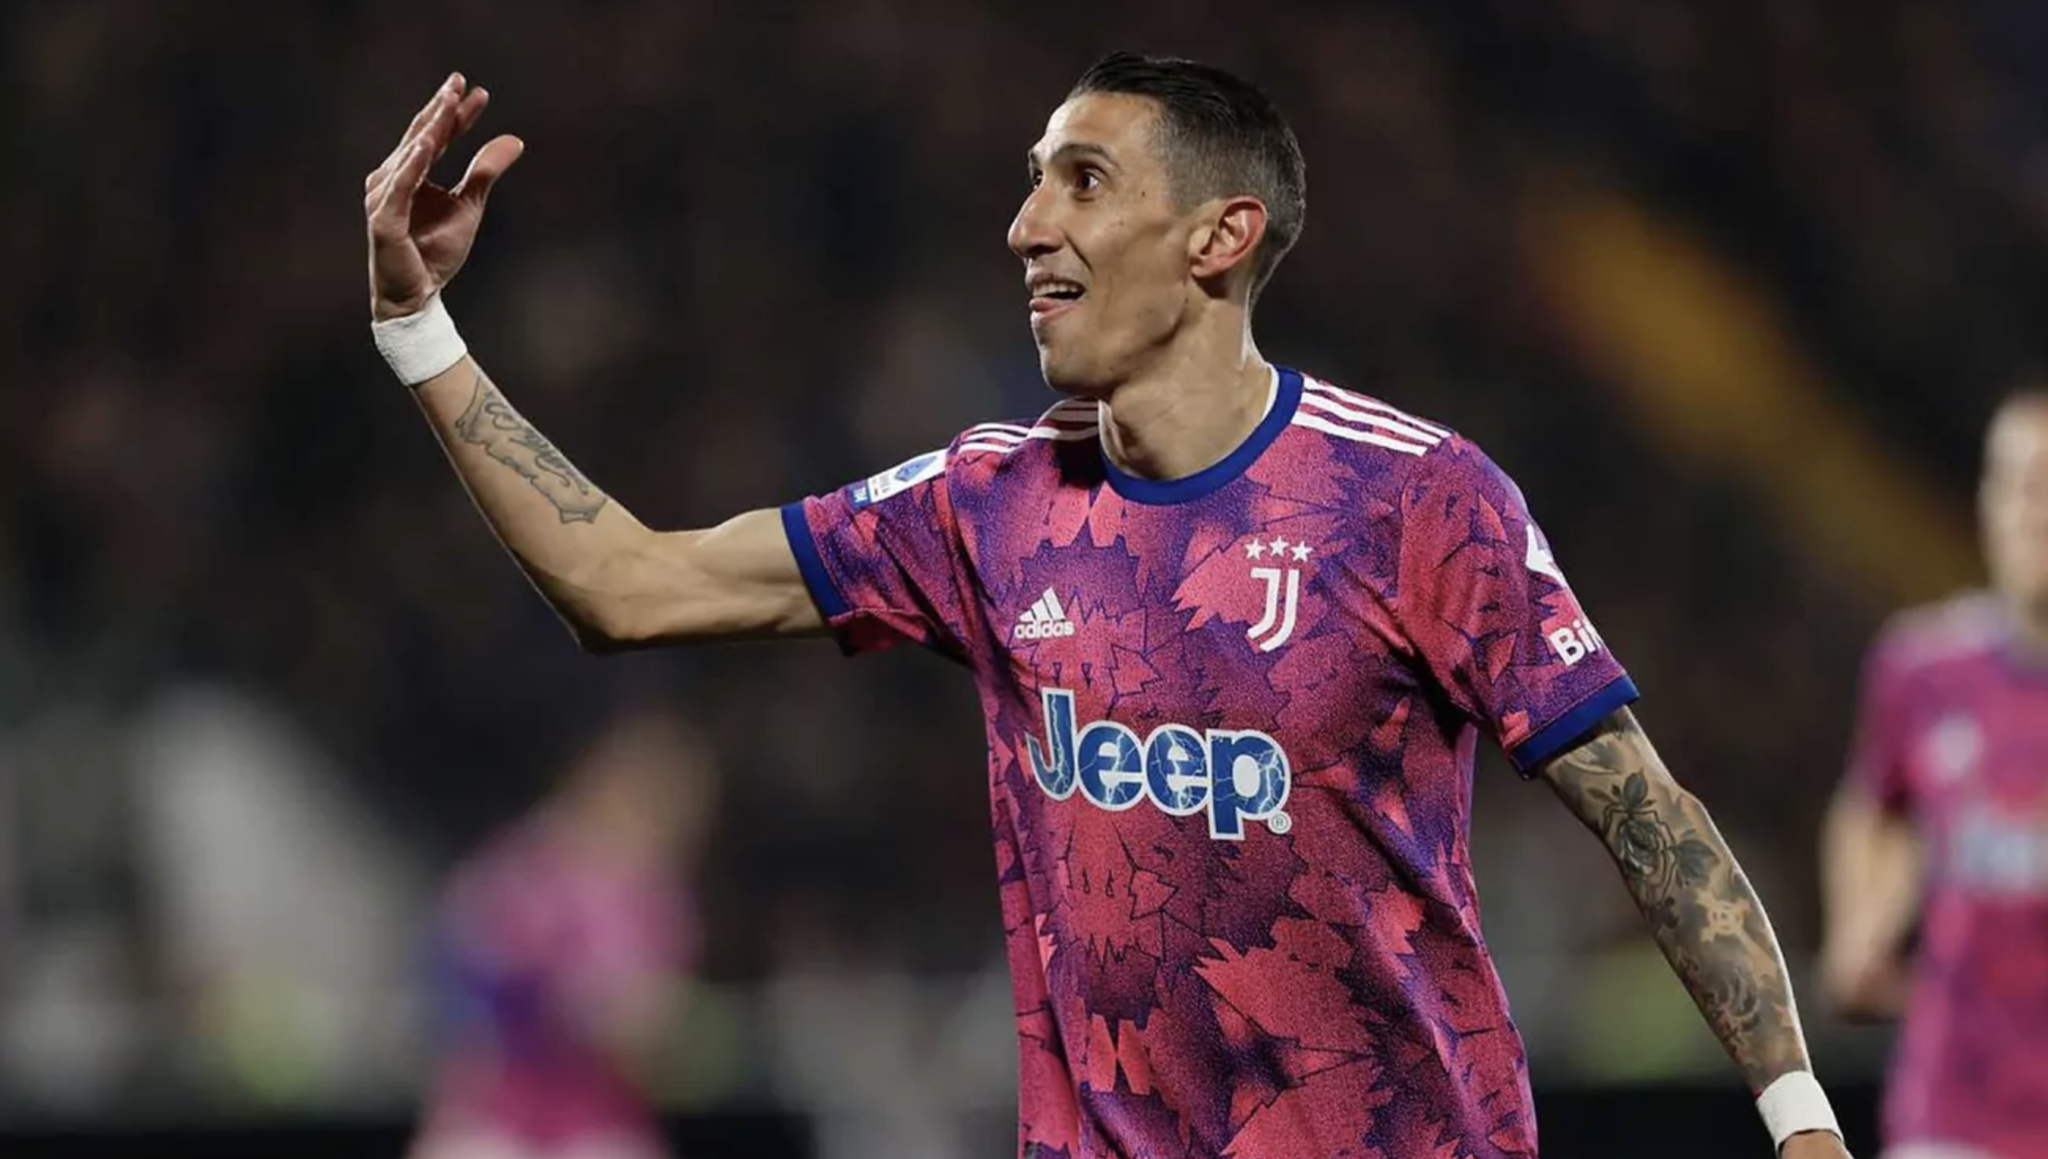 Di Maria is Inter Miami's new target in their bid to lure stars to MLS